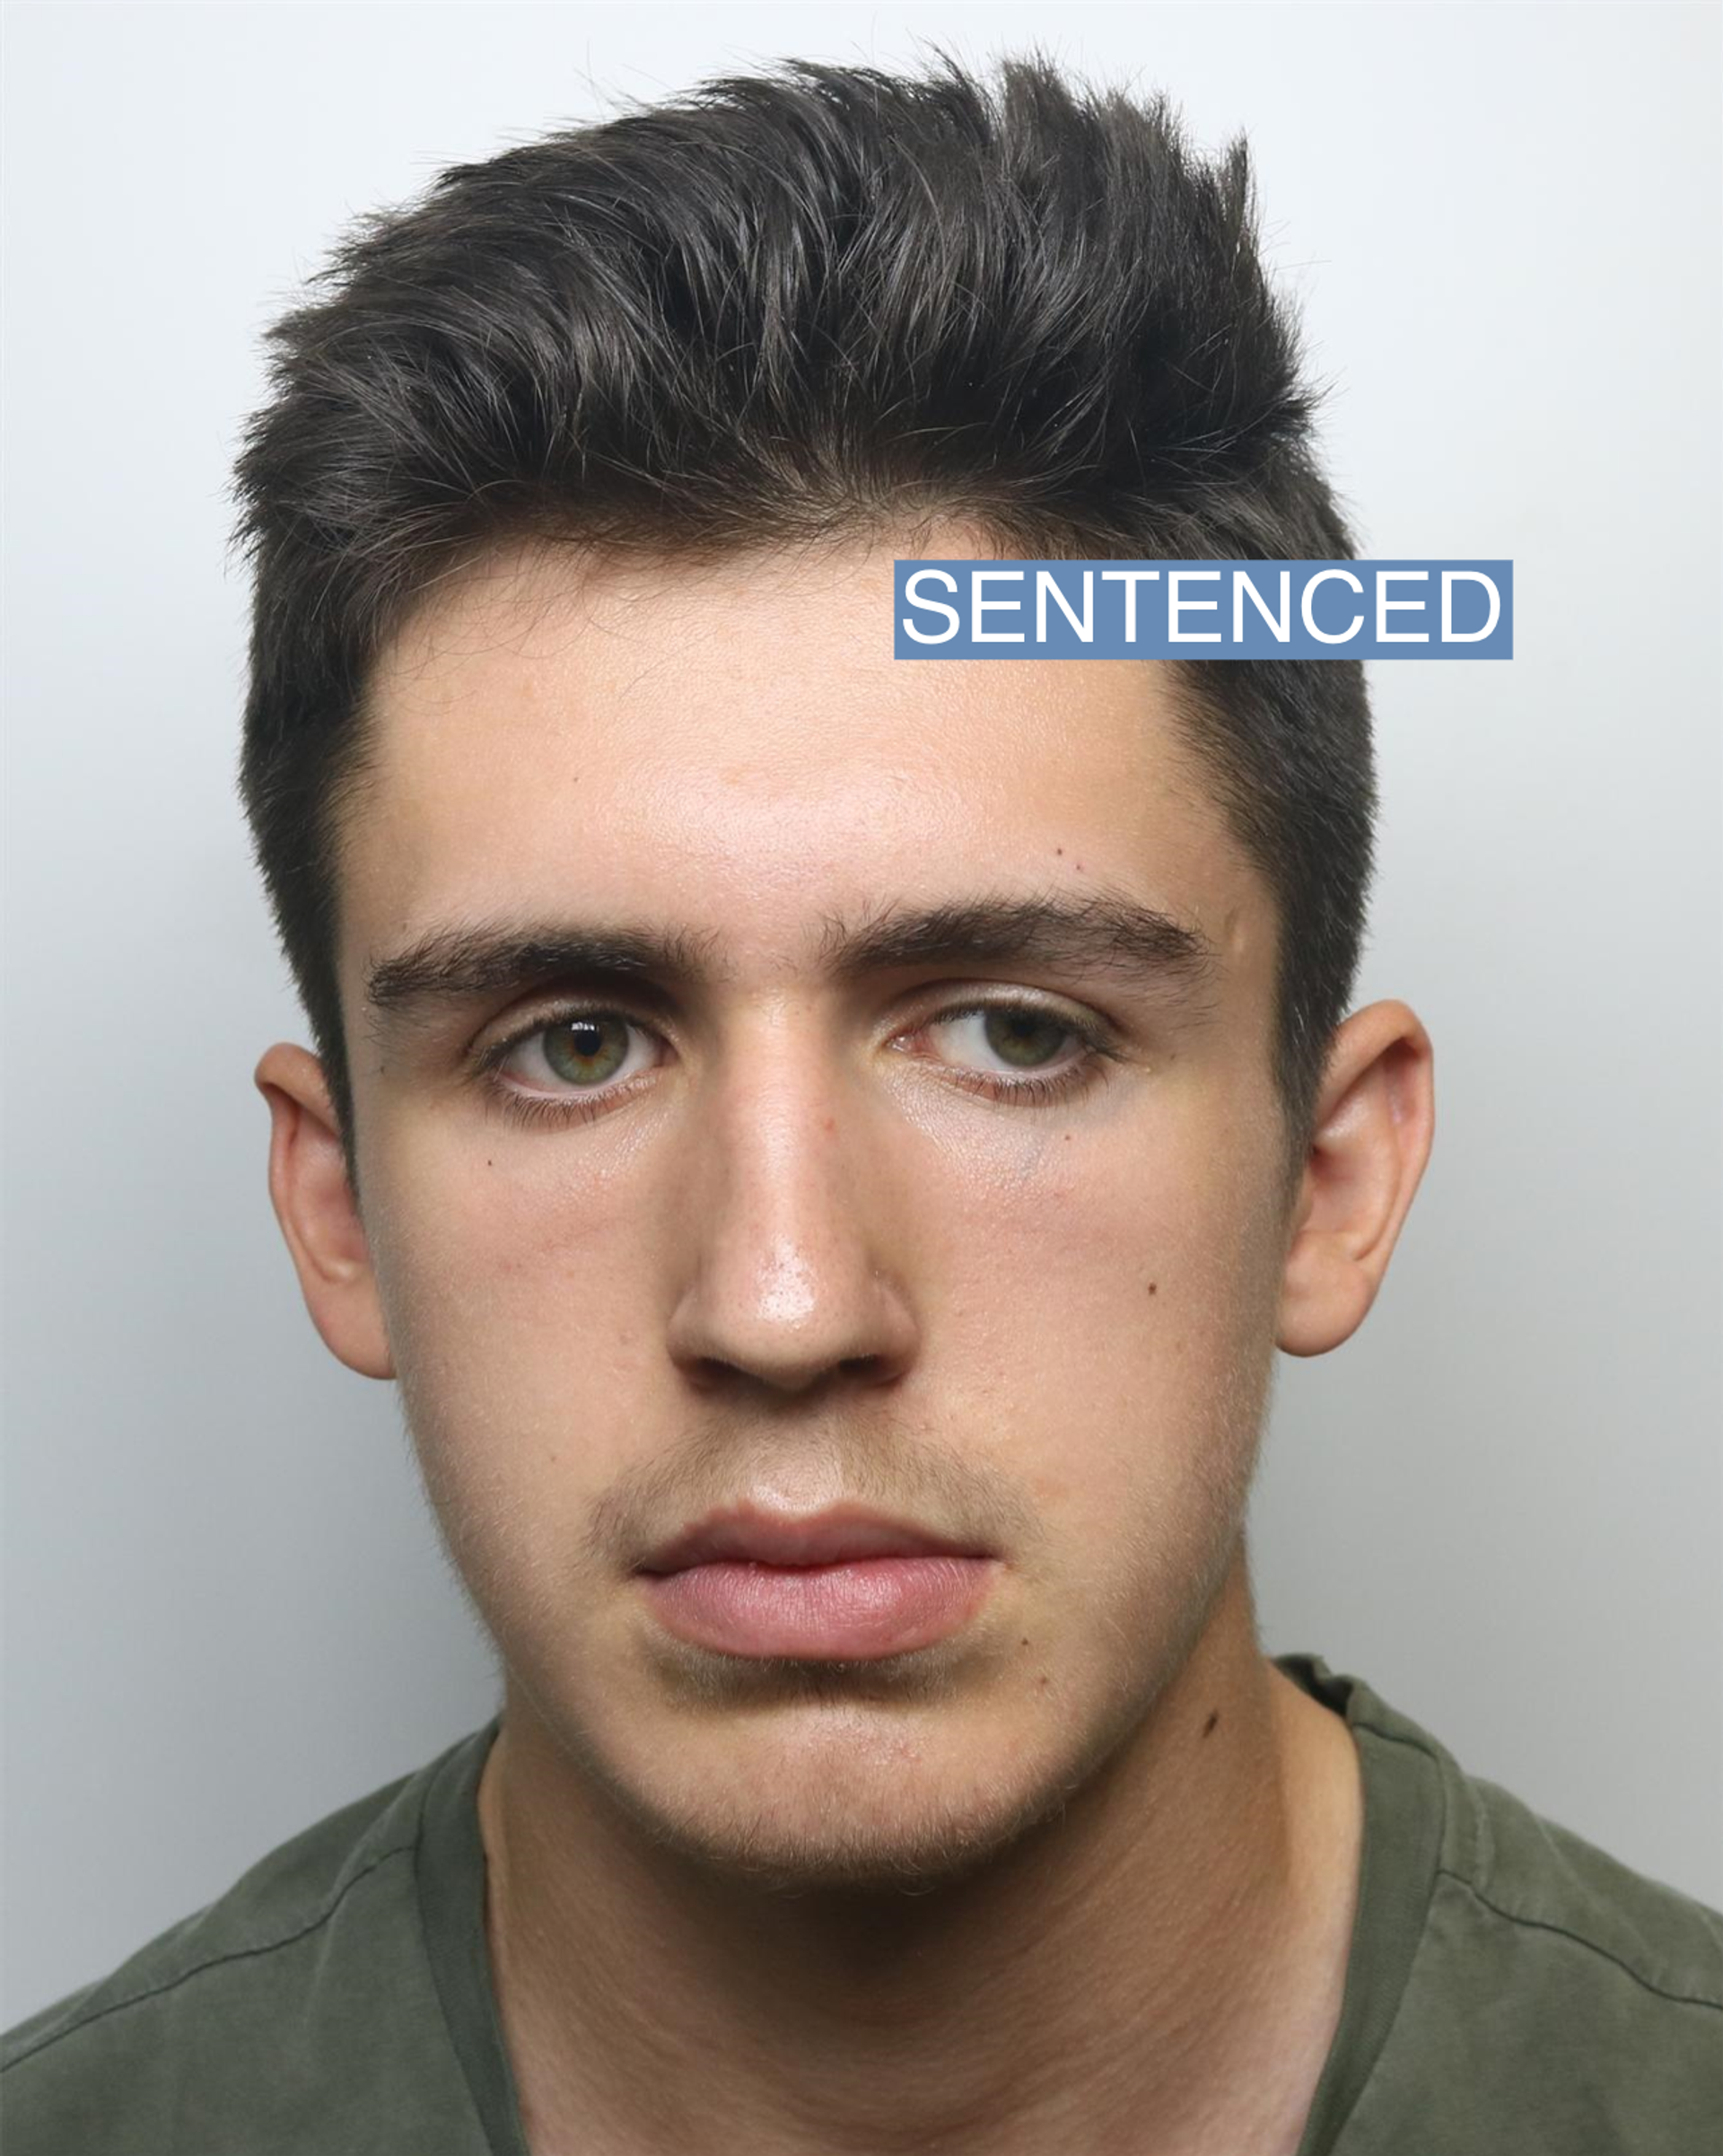 Daniel Harris, 19, sentenced Friday for encouraging terrorism which led to two separate US shootings.